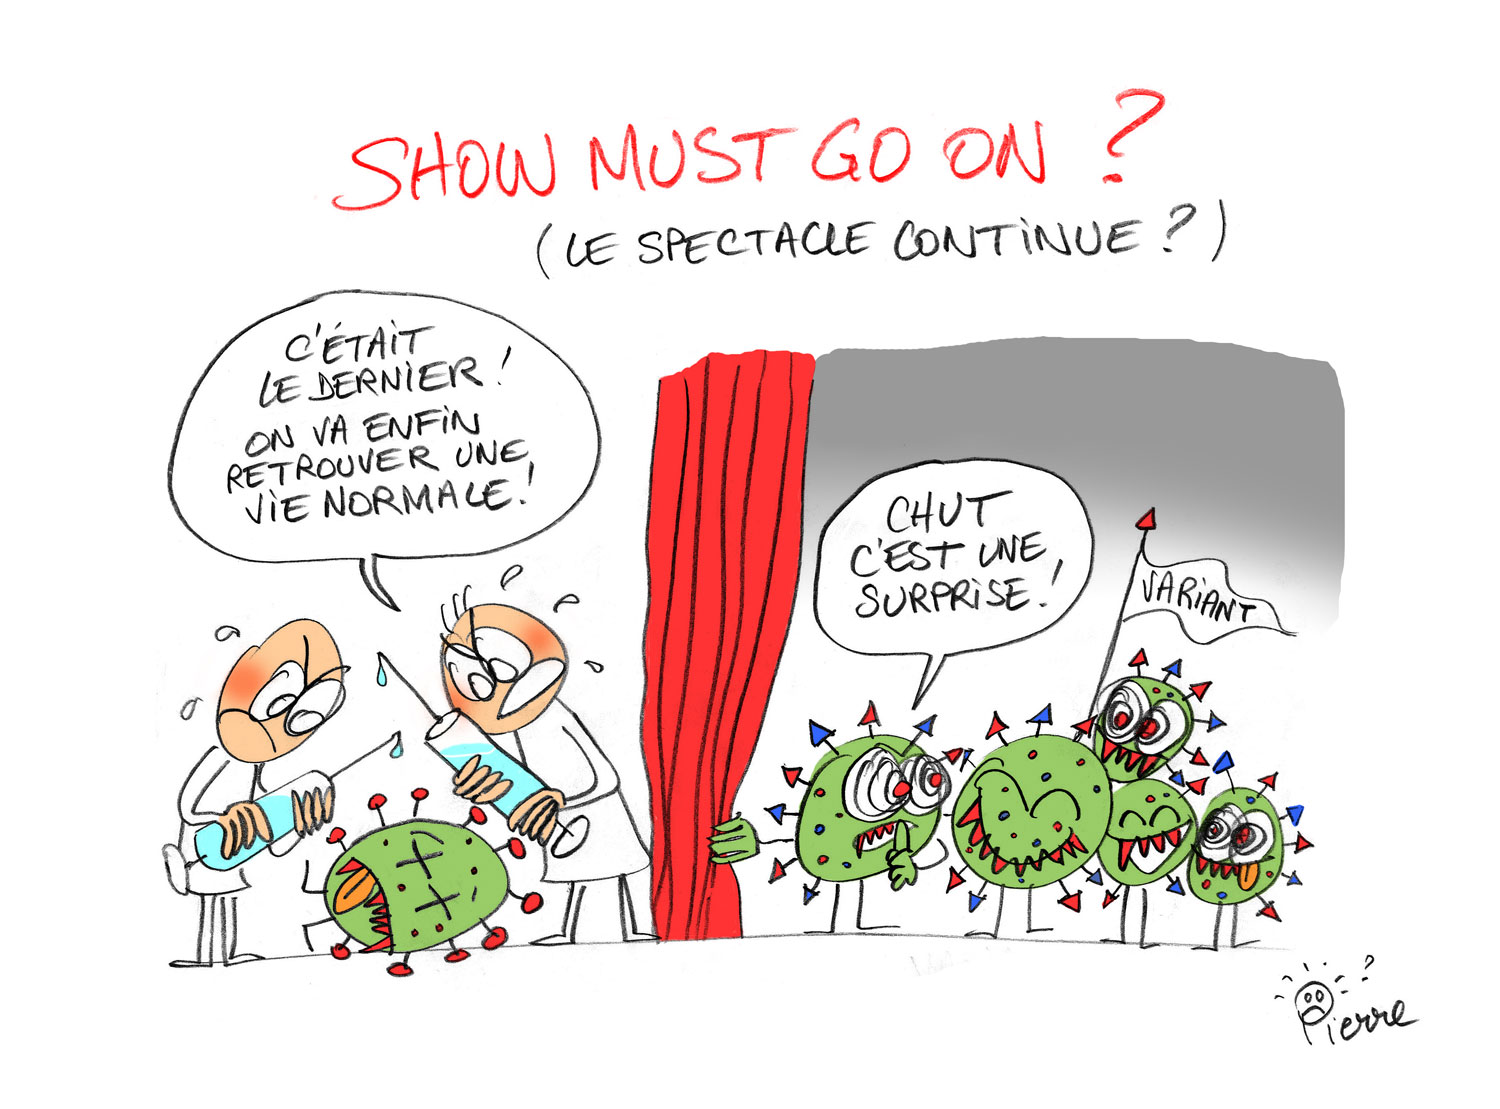 Le spectacle continue ?